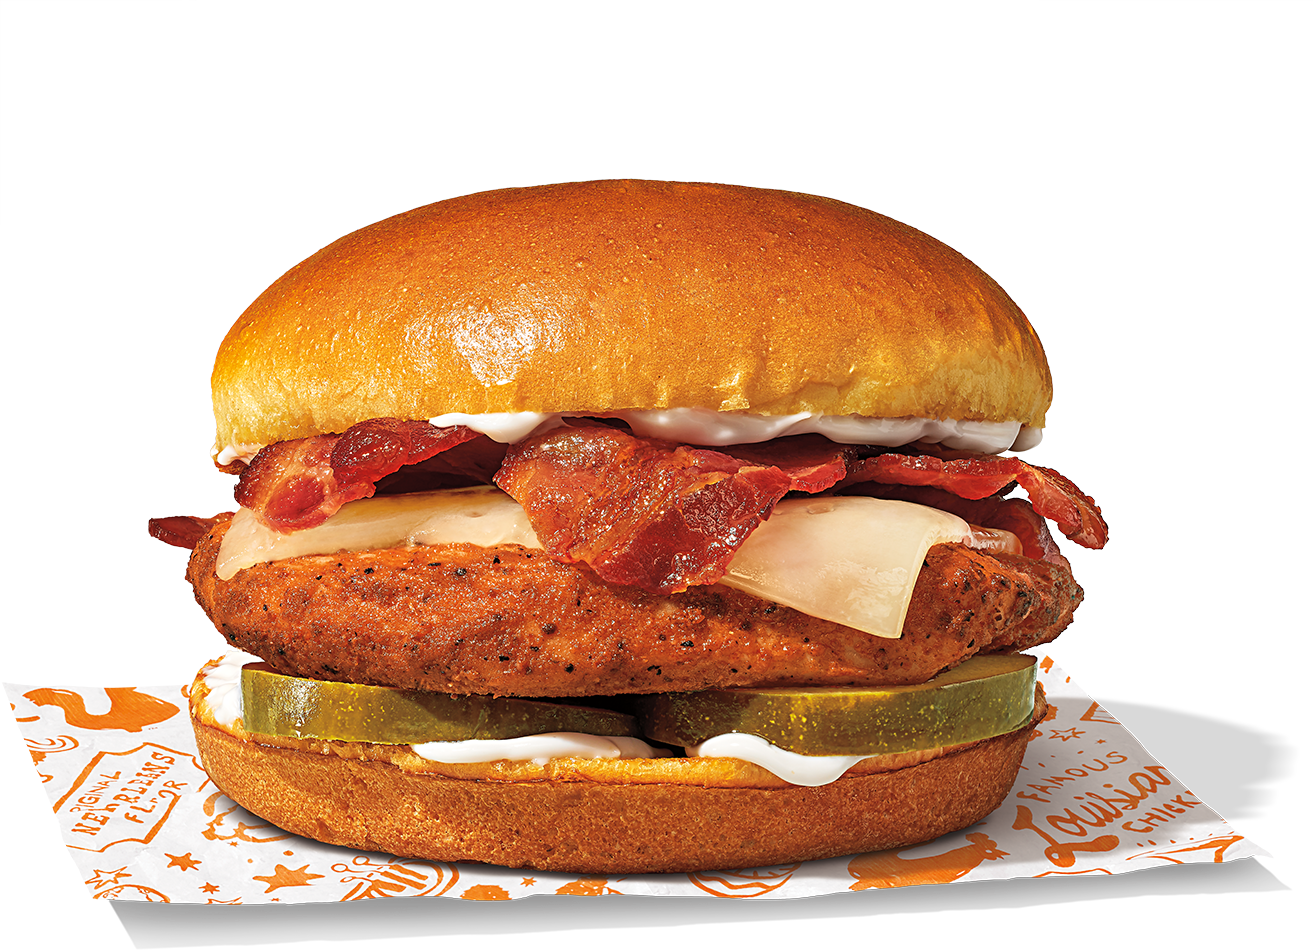 Popeyes Blackened Bacon & Cheese Chicken Sandwich Nutrition Facts